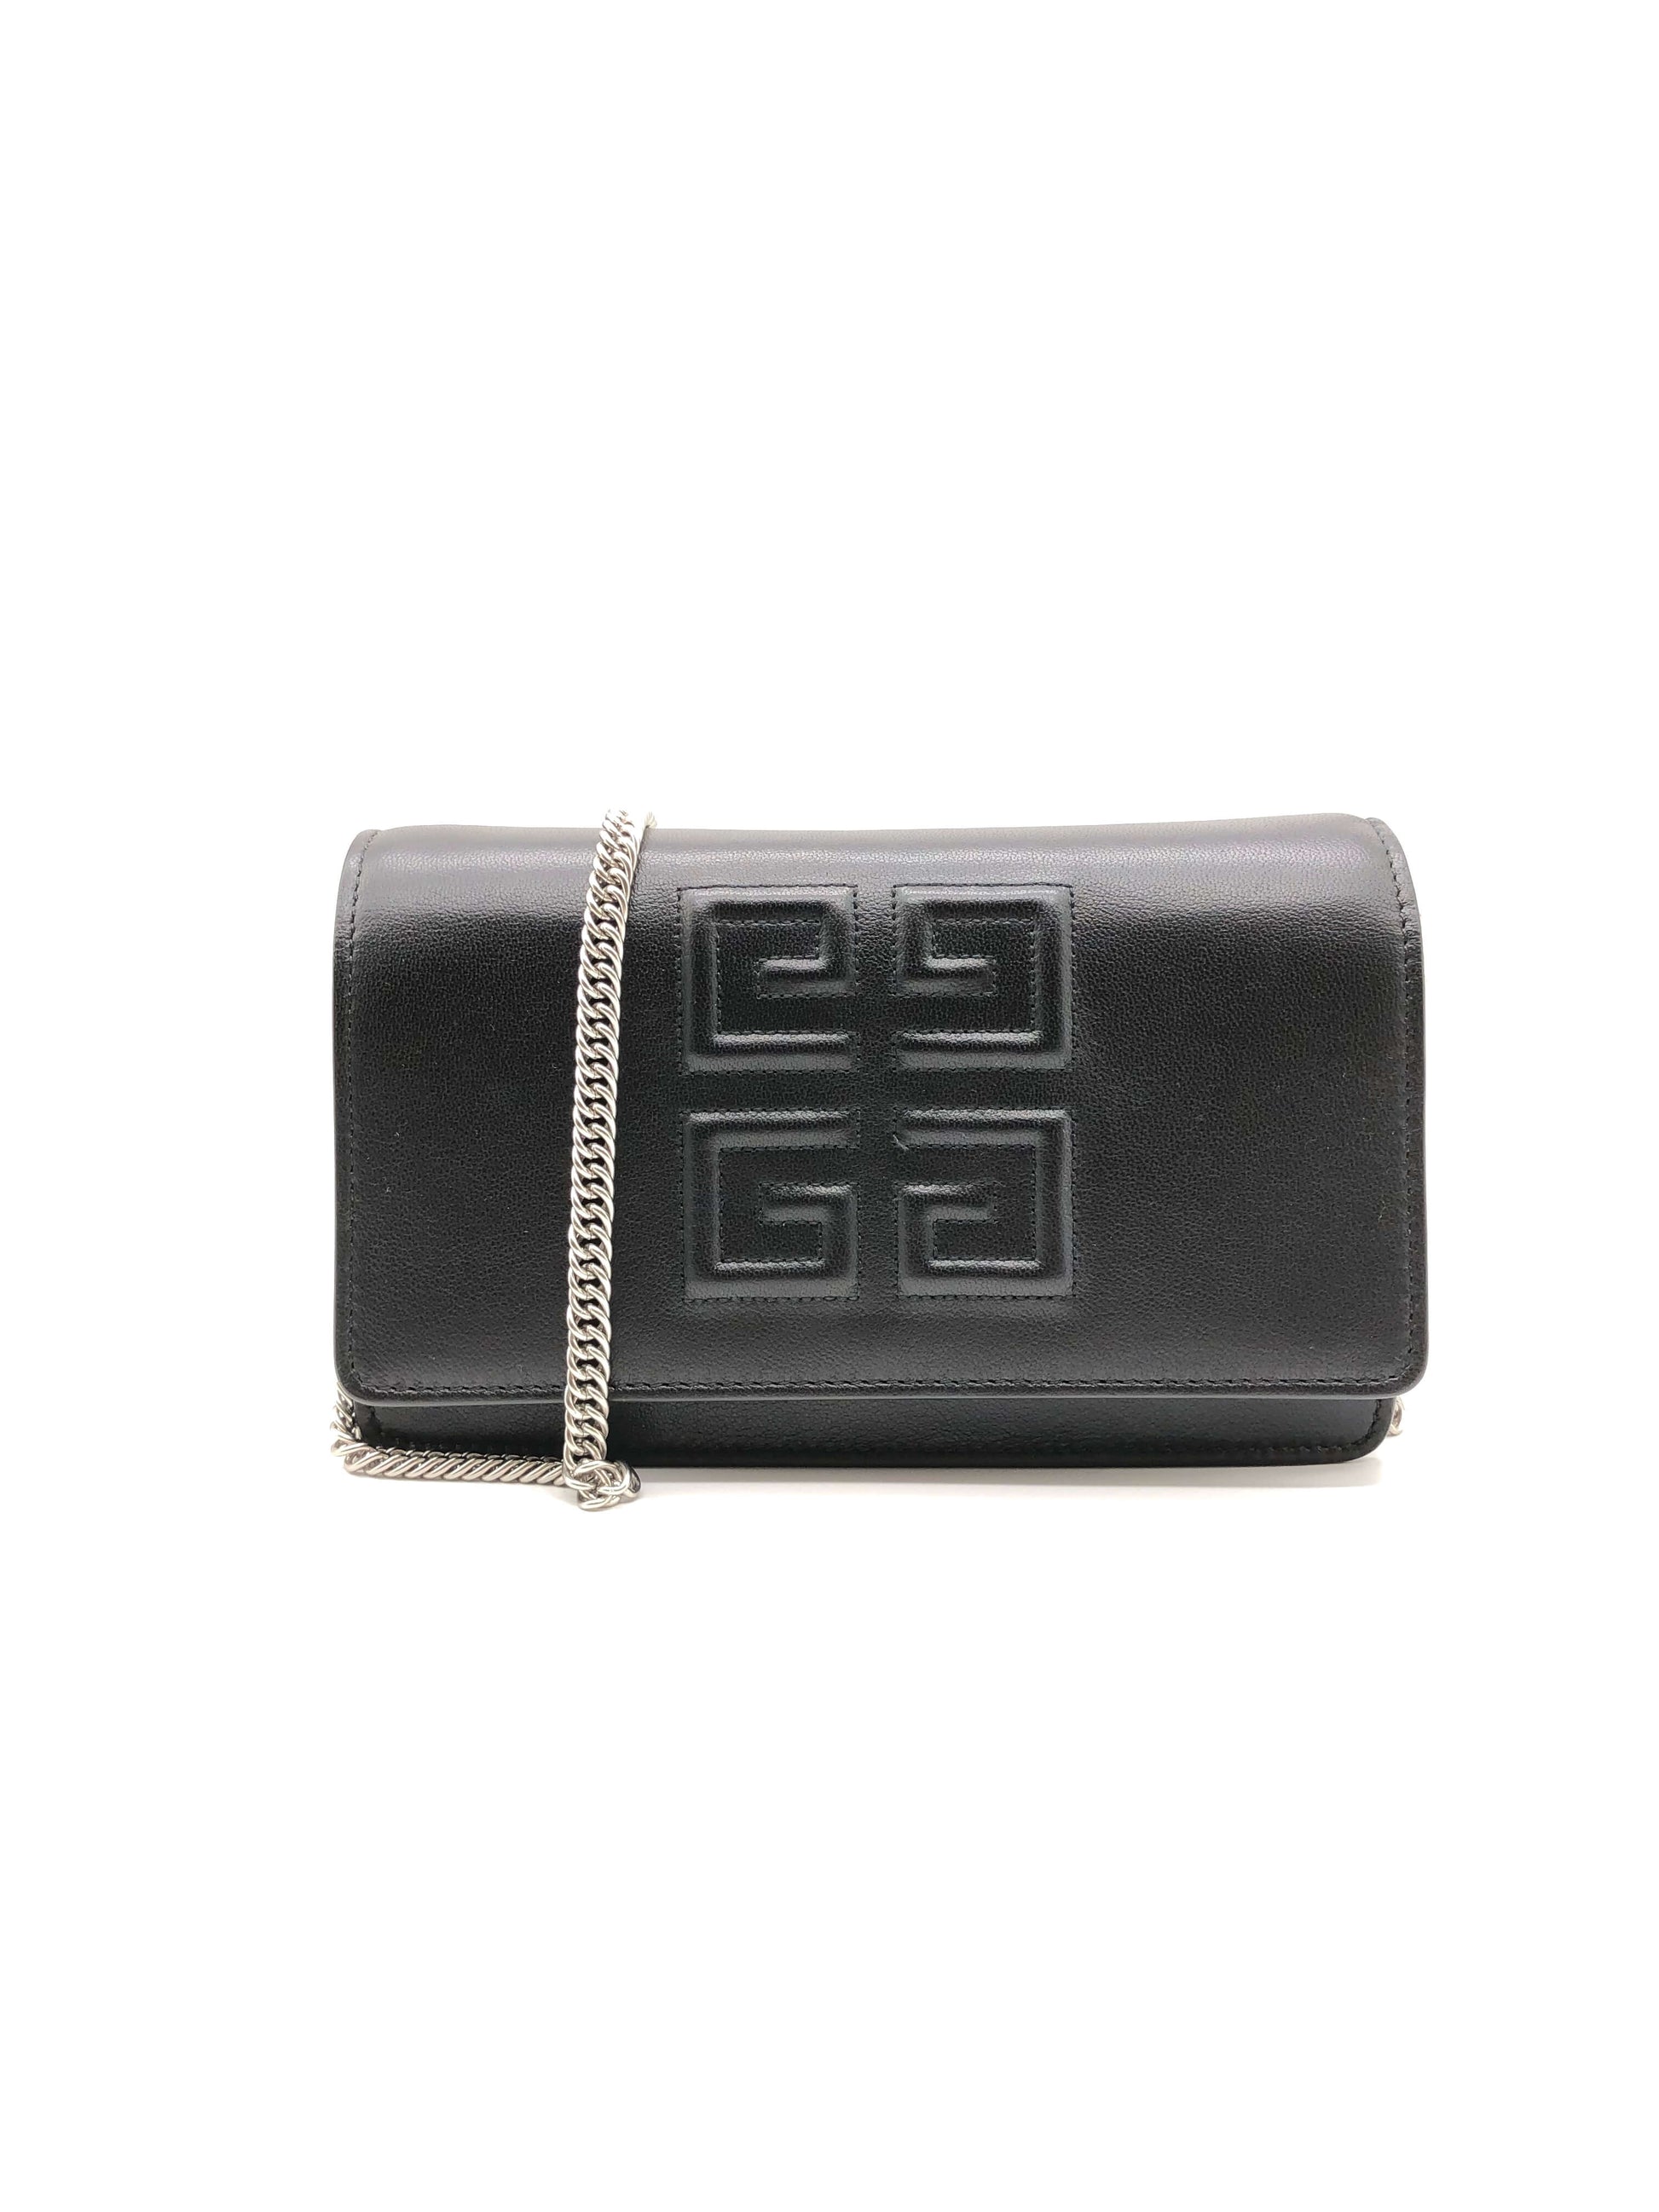 Givenchy Black Logo Embossed Small Leather Bag